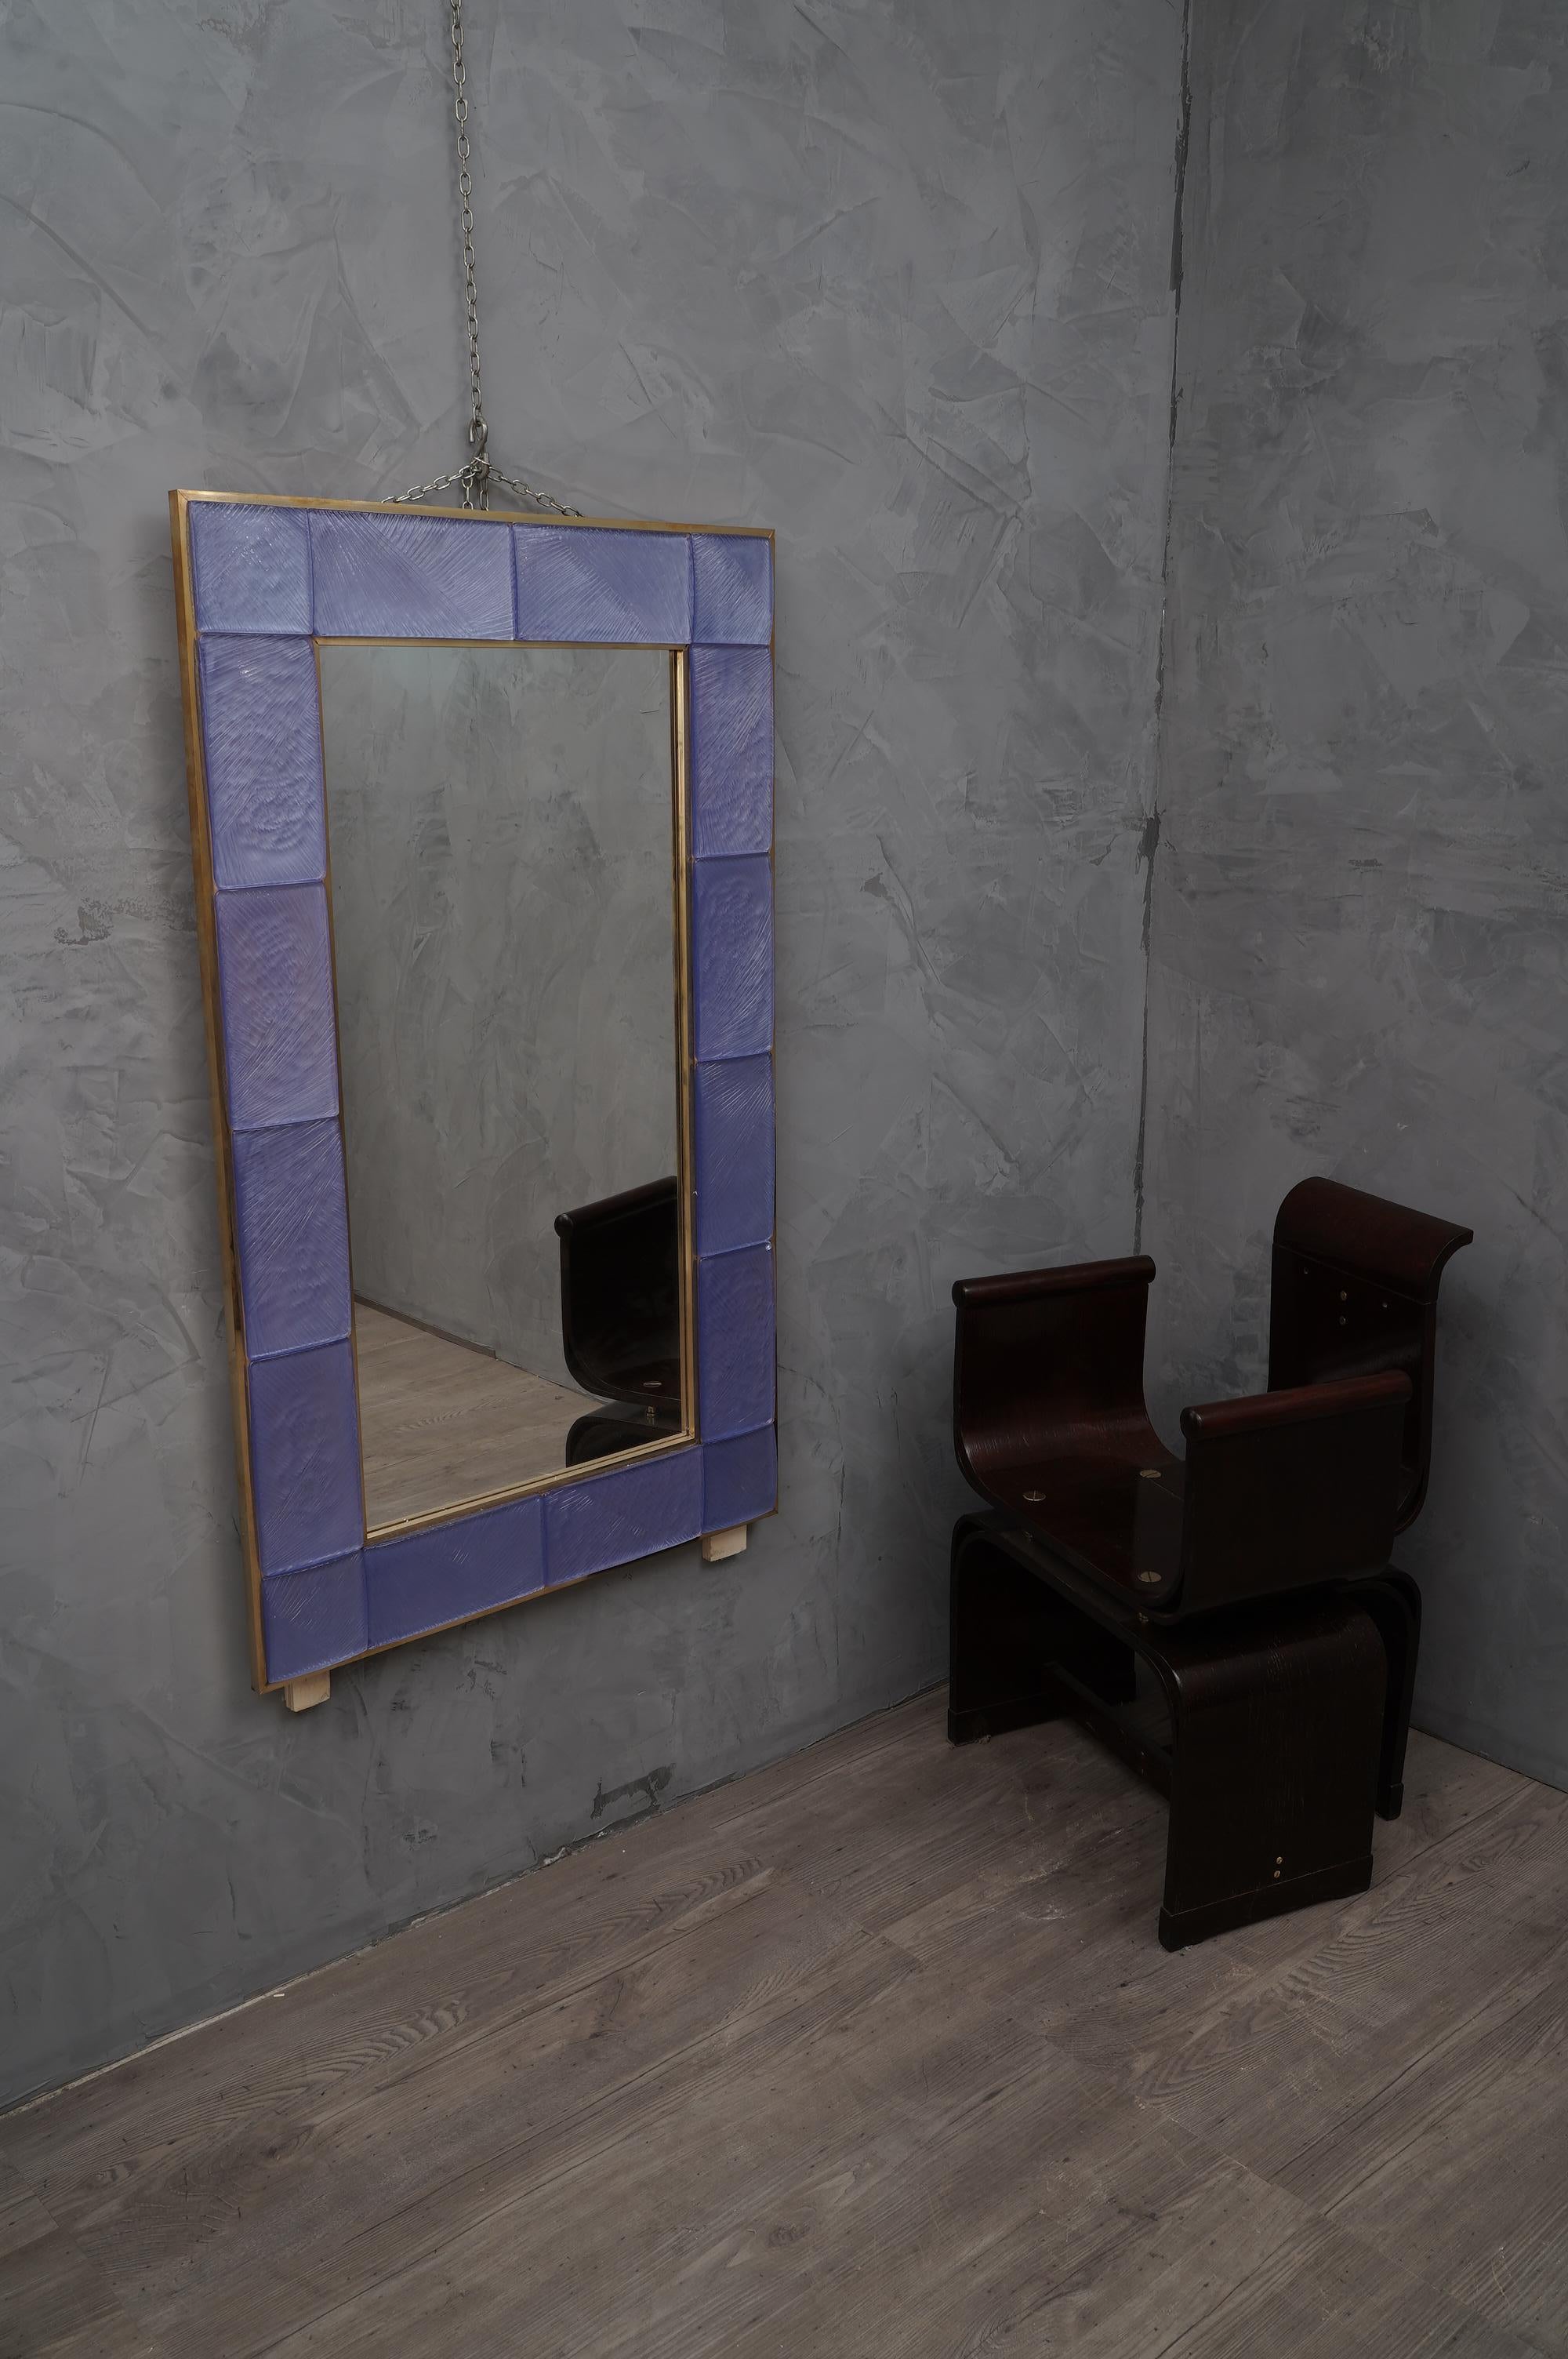 A strong light blue frame, reach the eye of the beholder, leaving him entranced; of Murano light blue art glass wall mirror.

The structure of the wall mirror is in wood, where the blue Murano glass is housed. The frame of the mirror is made up of a